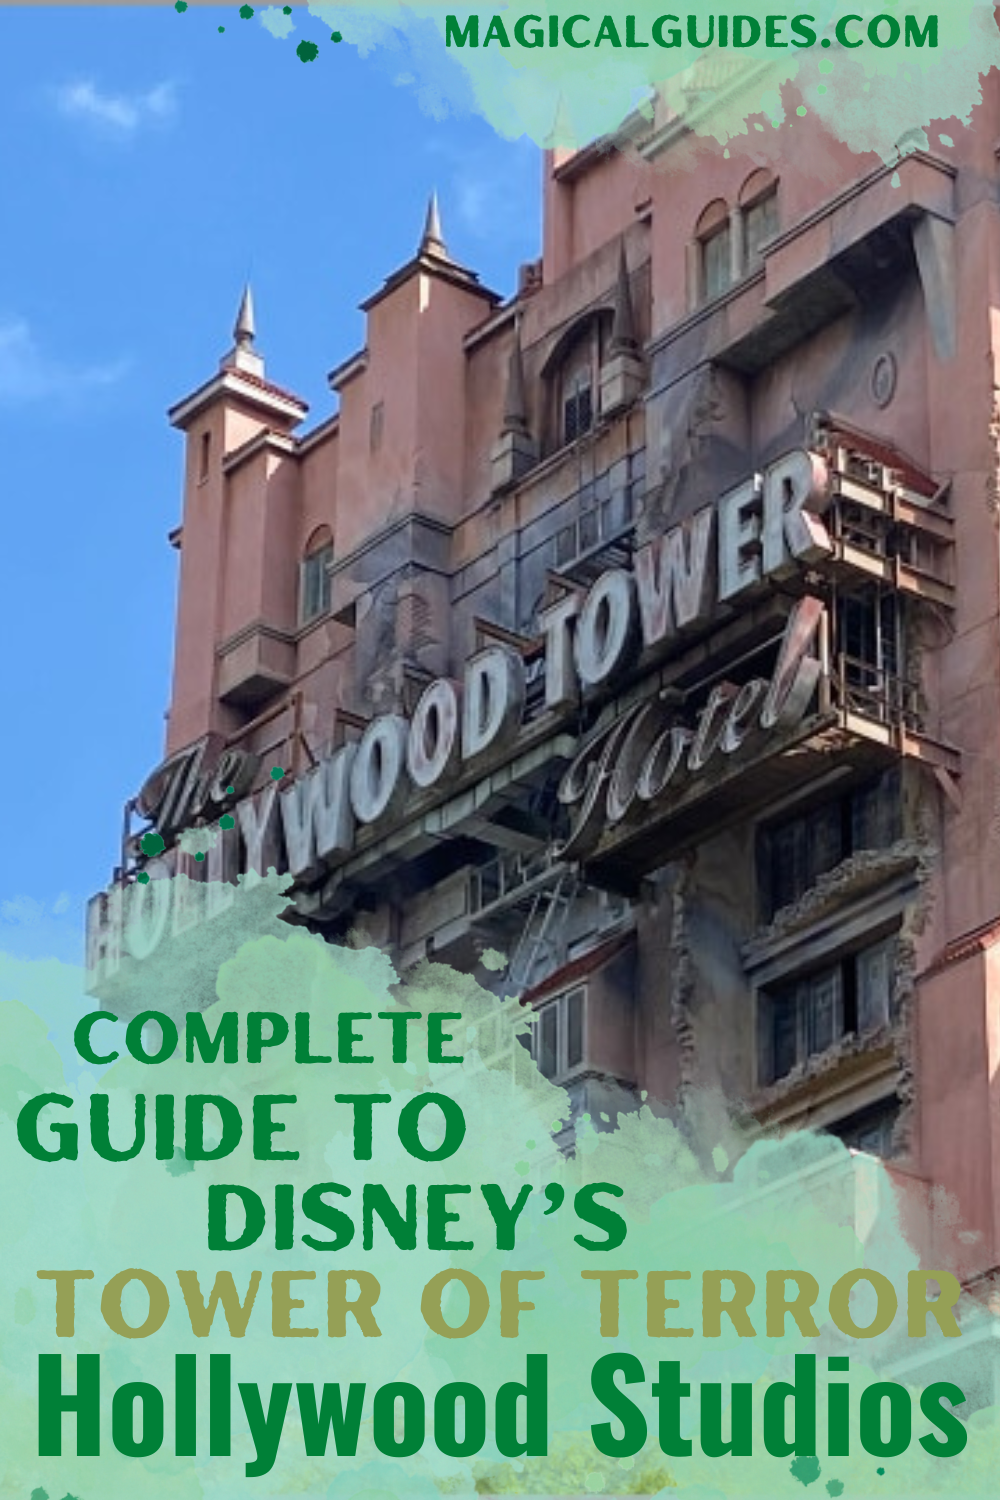 Is Tower of Terror Scary? Find out everything you need to know before you ride this popular thrill ride. Complete ride guide to this Hollywood Studios ride. Can you handle entering the Twilight Zone?